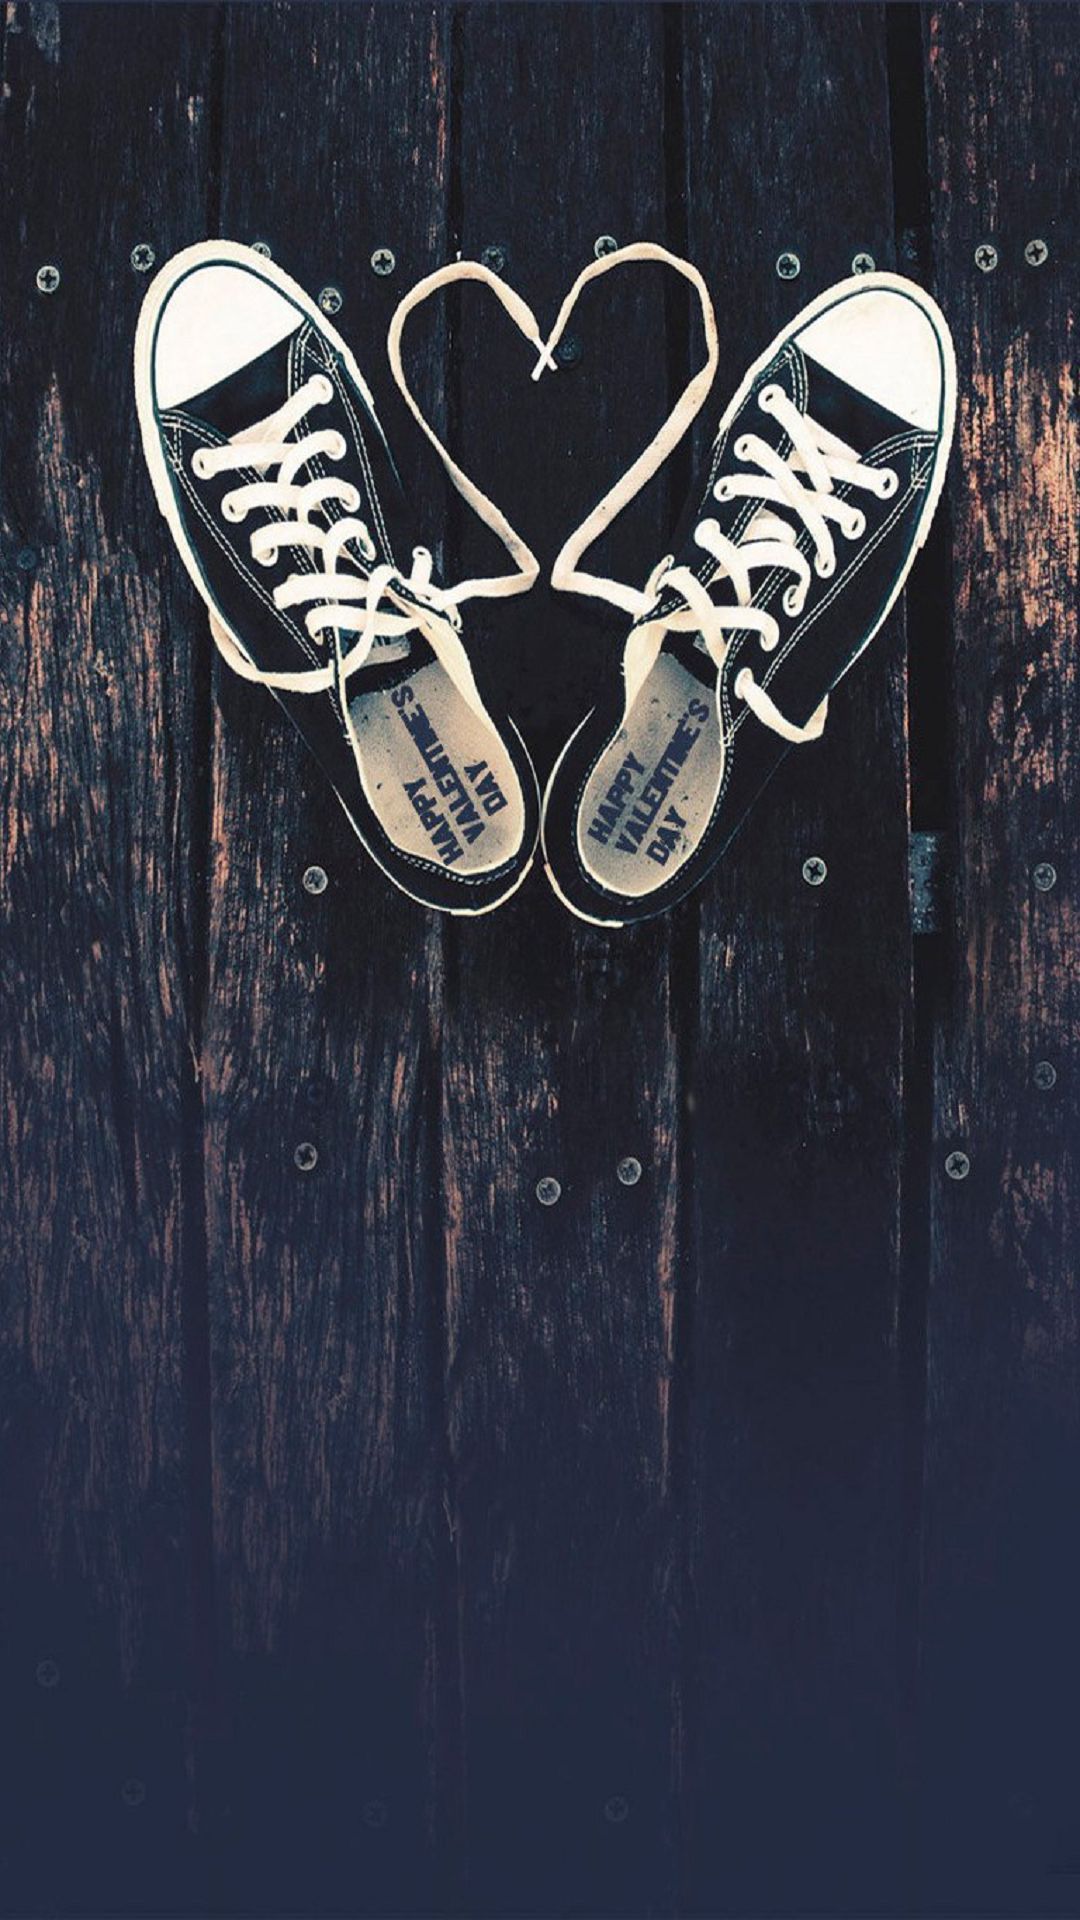 Converse iPhone Wallpaper with high-resolution 1080x1920 pixel. You can use this wallpaper for your iPhone 5, 6, 7, 8, X, XS, XR backgrounds, Mobile Screensaver, or iPad Lock Screen - Converse